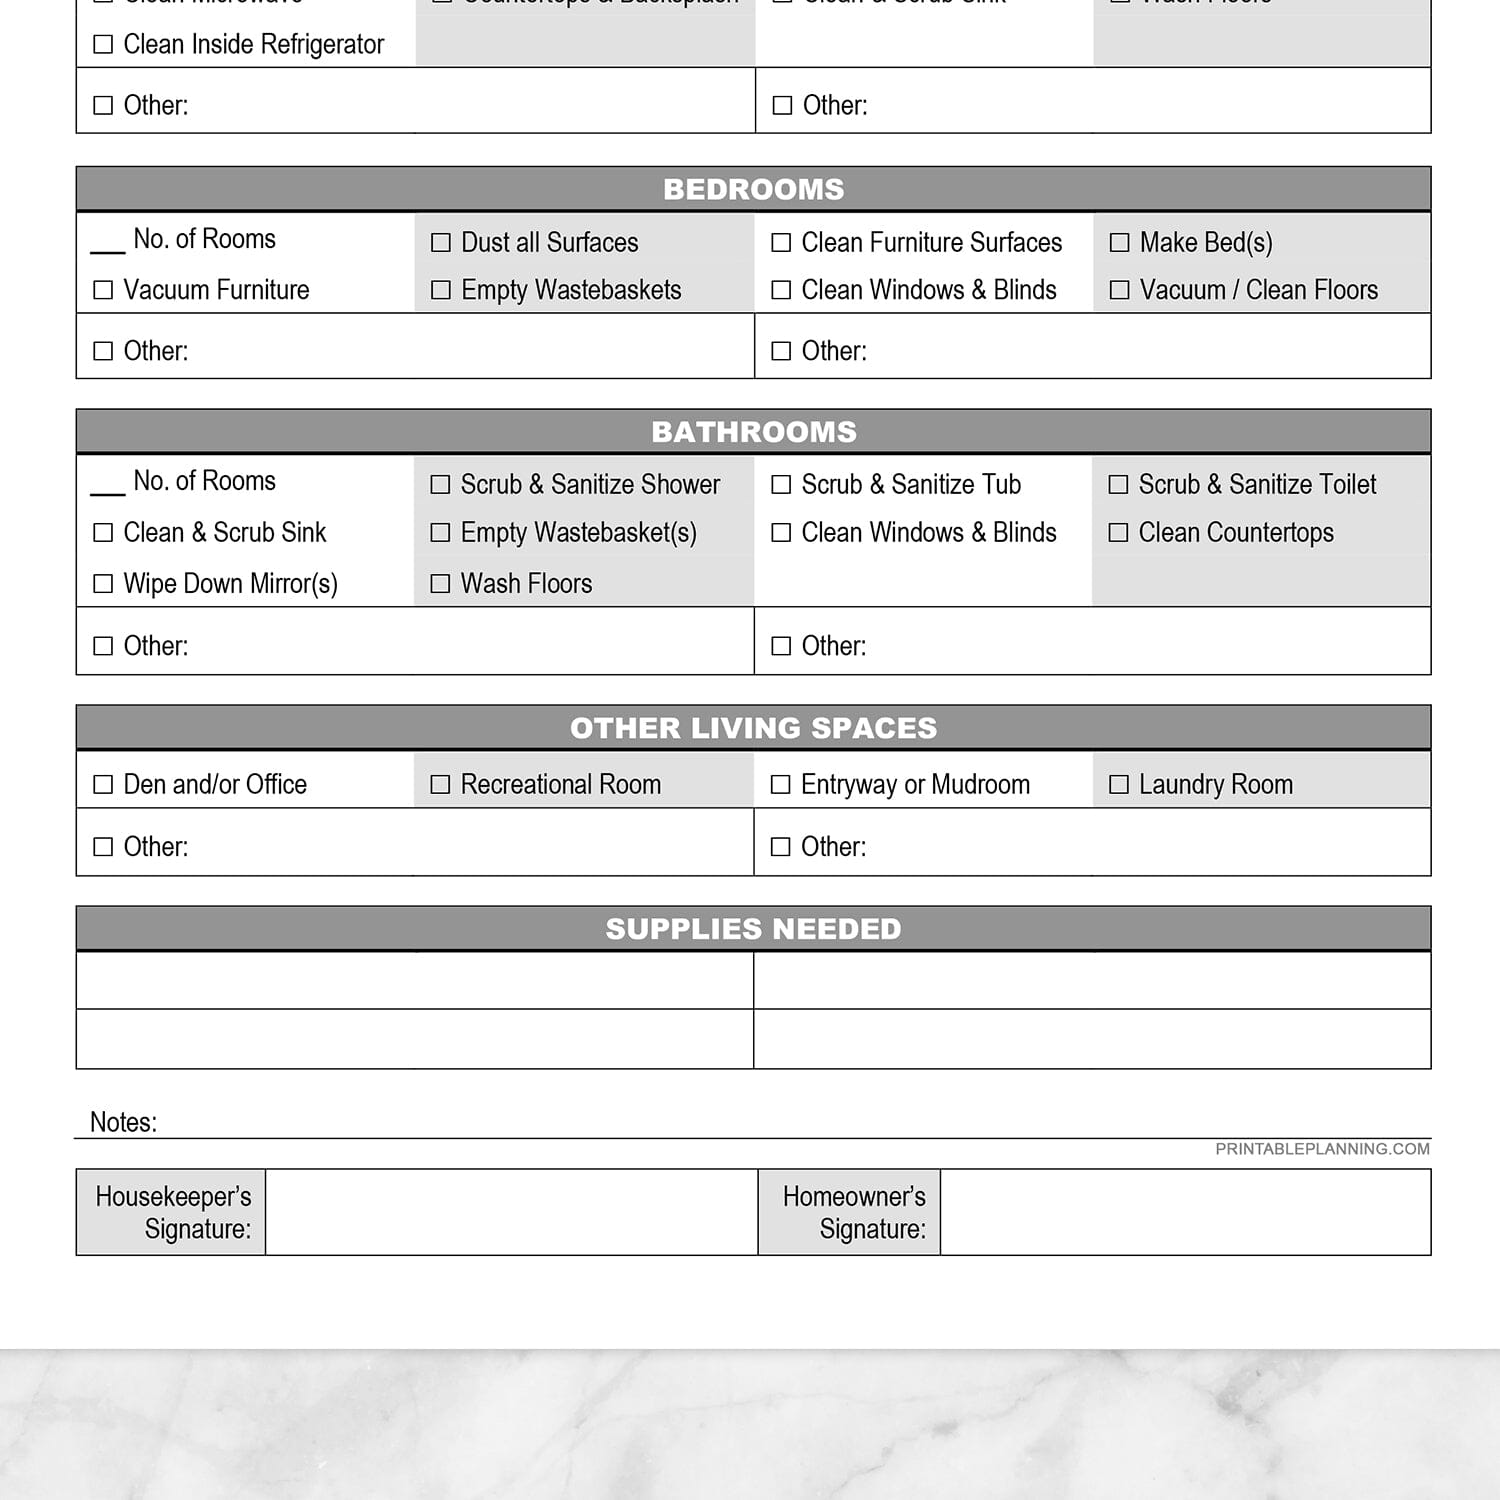 Printable Housekeeping Log - Detailed Cleaning Service Tracking at Printable Planning. Image shows a closeup of the bottom half of the page.